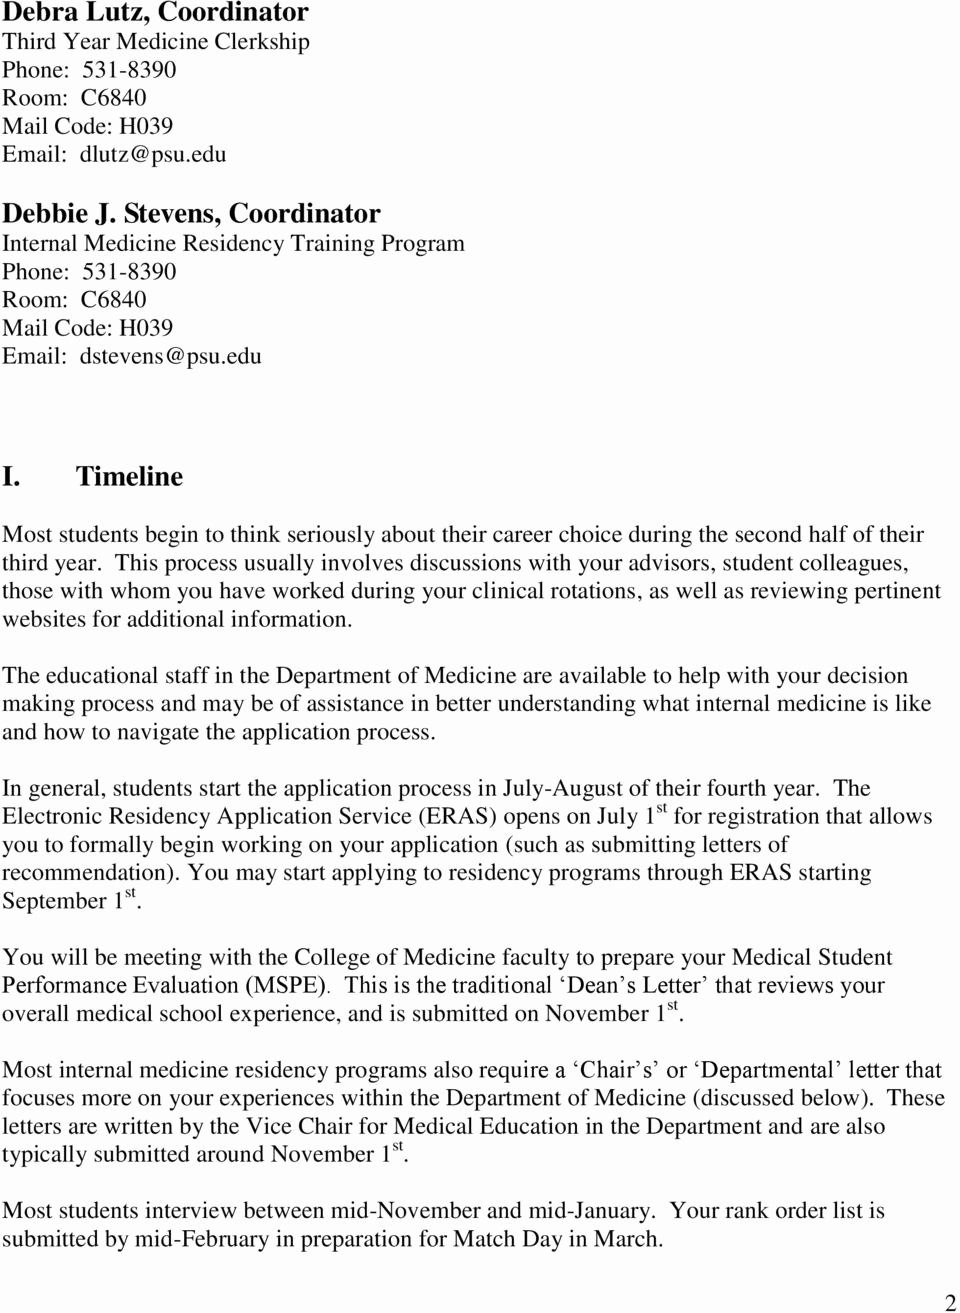 Internal Medicine Letter Of Recommendation Awesome Suggestions for Applying to An Internal Medicine Residency